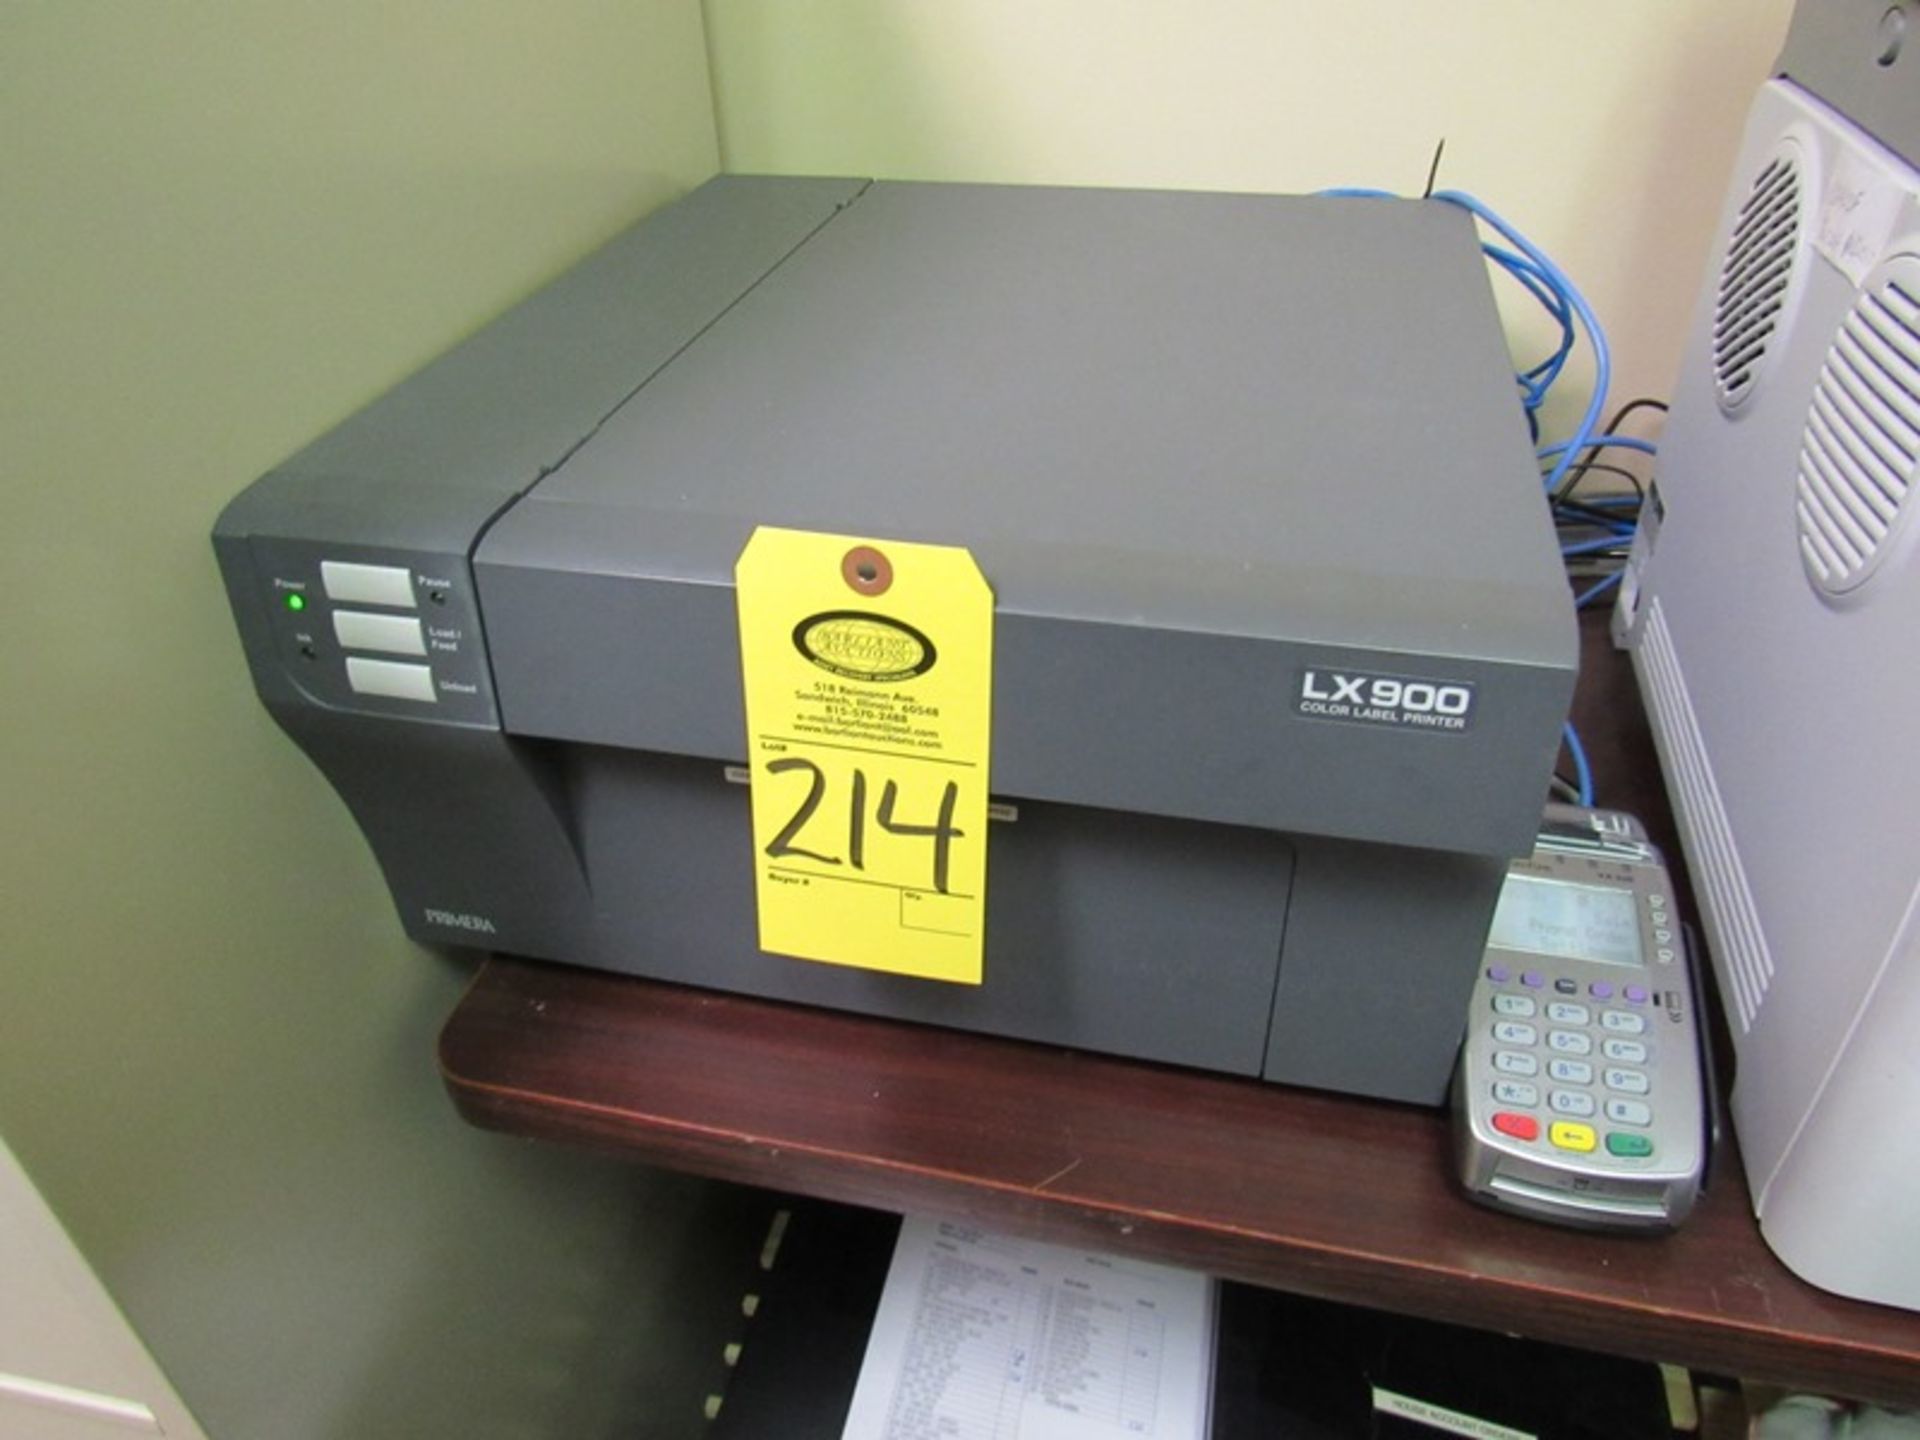 Primera Mdl. LX900 Color Label Printer (All Funds Must Be Received by Friday, August 9th. Everything